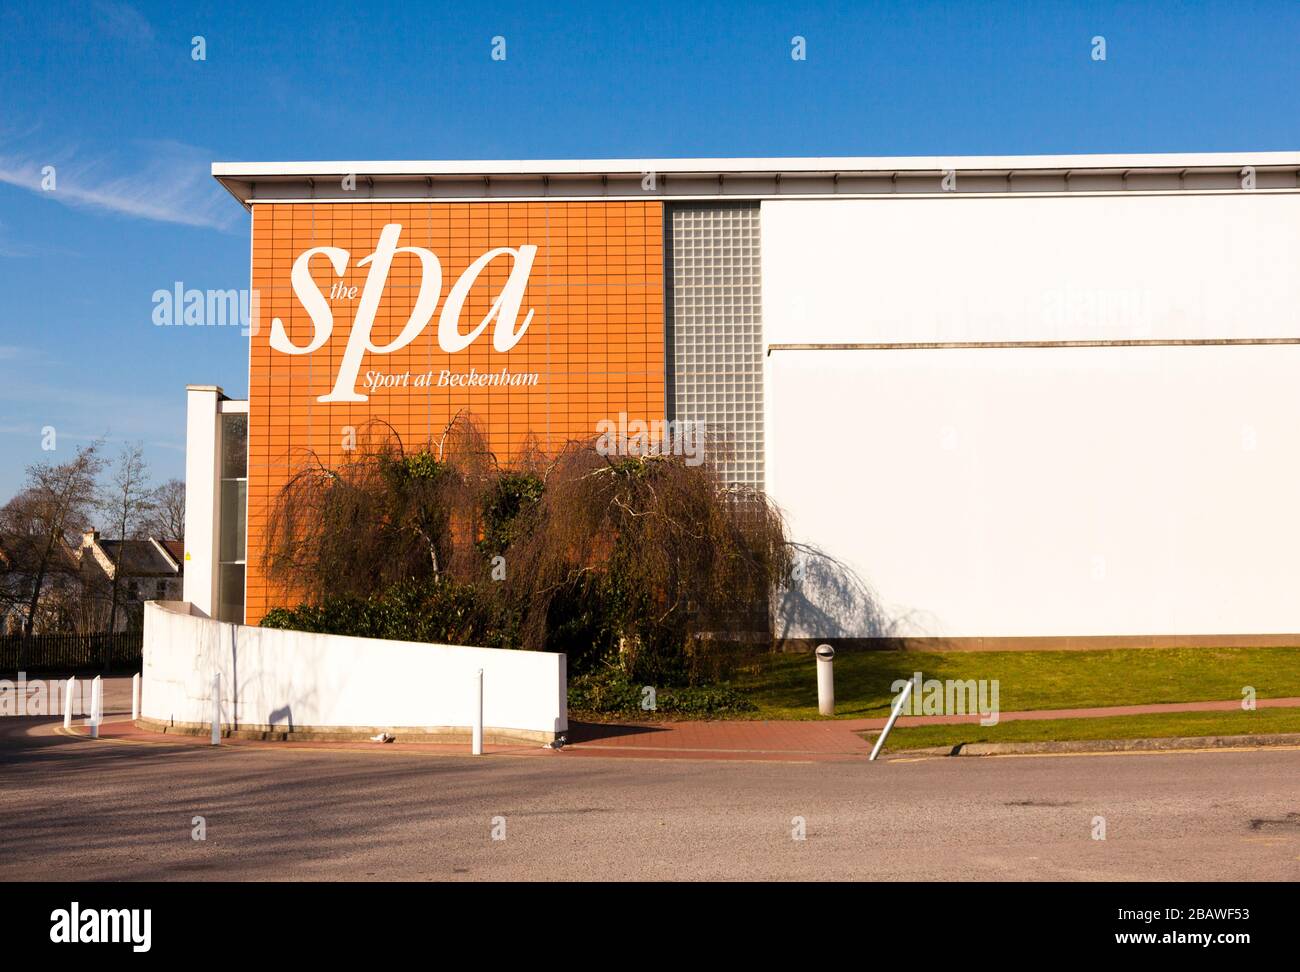 The Spa, swimming pool, gym and recreation centre, Beckenham, London, UK Stock Photo